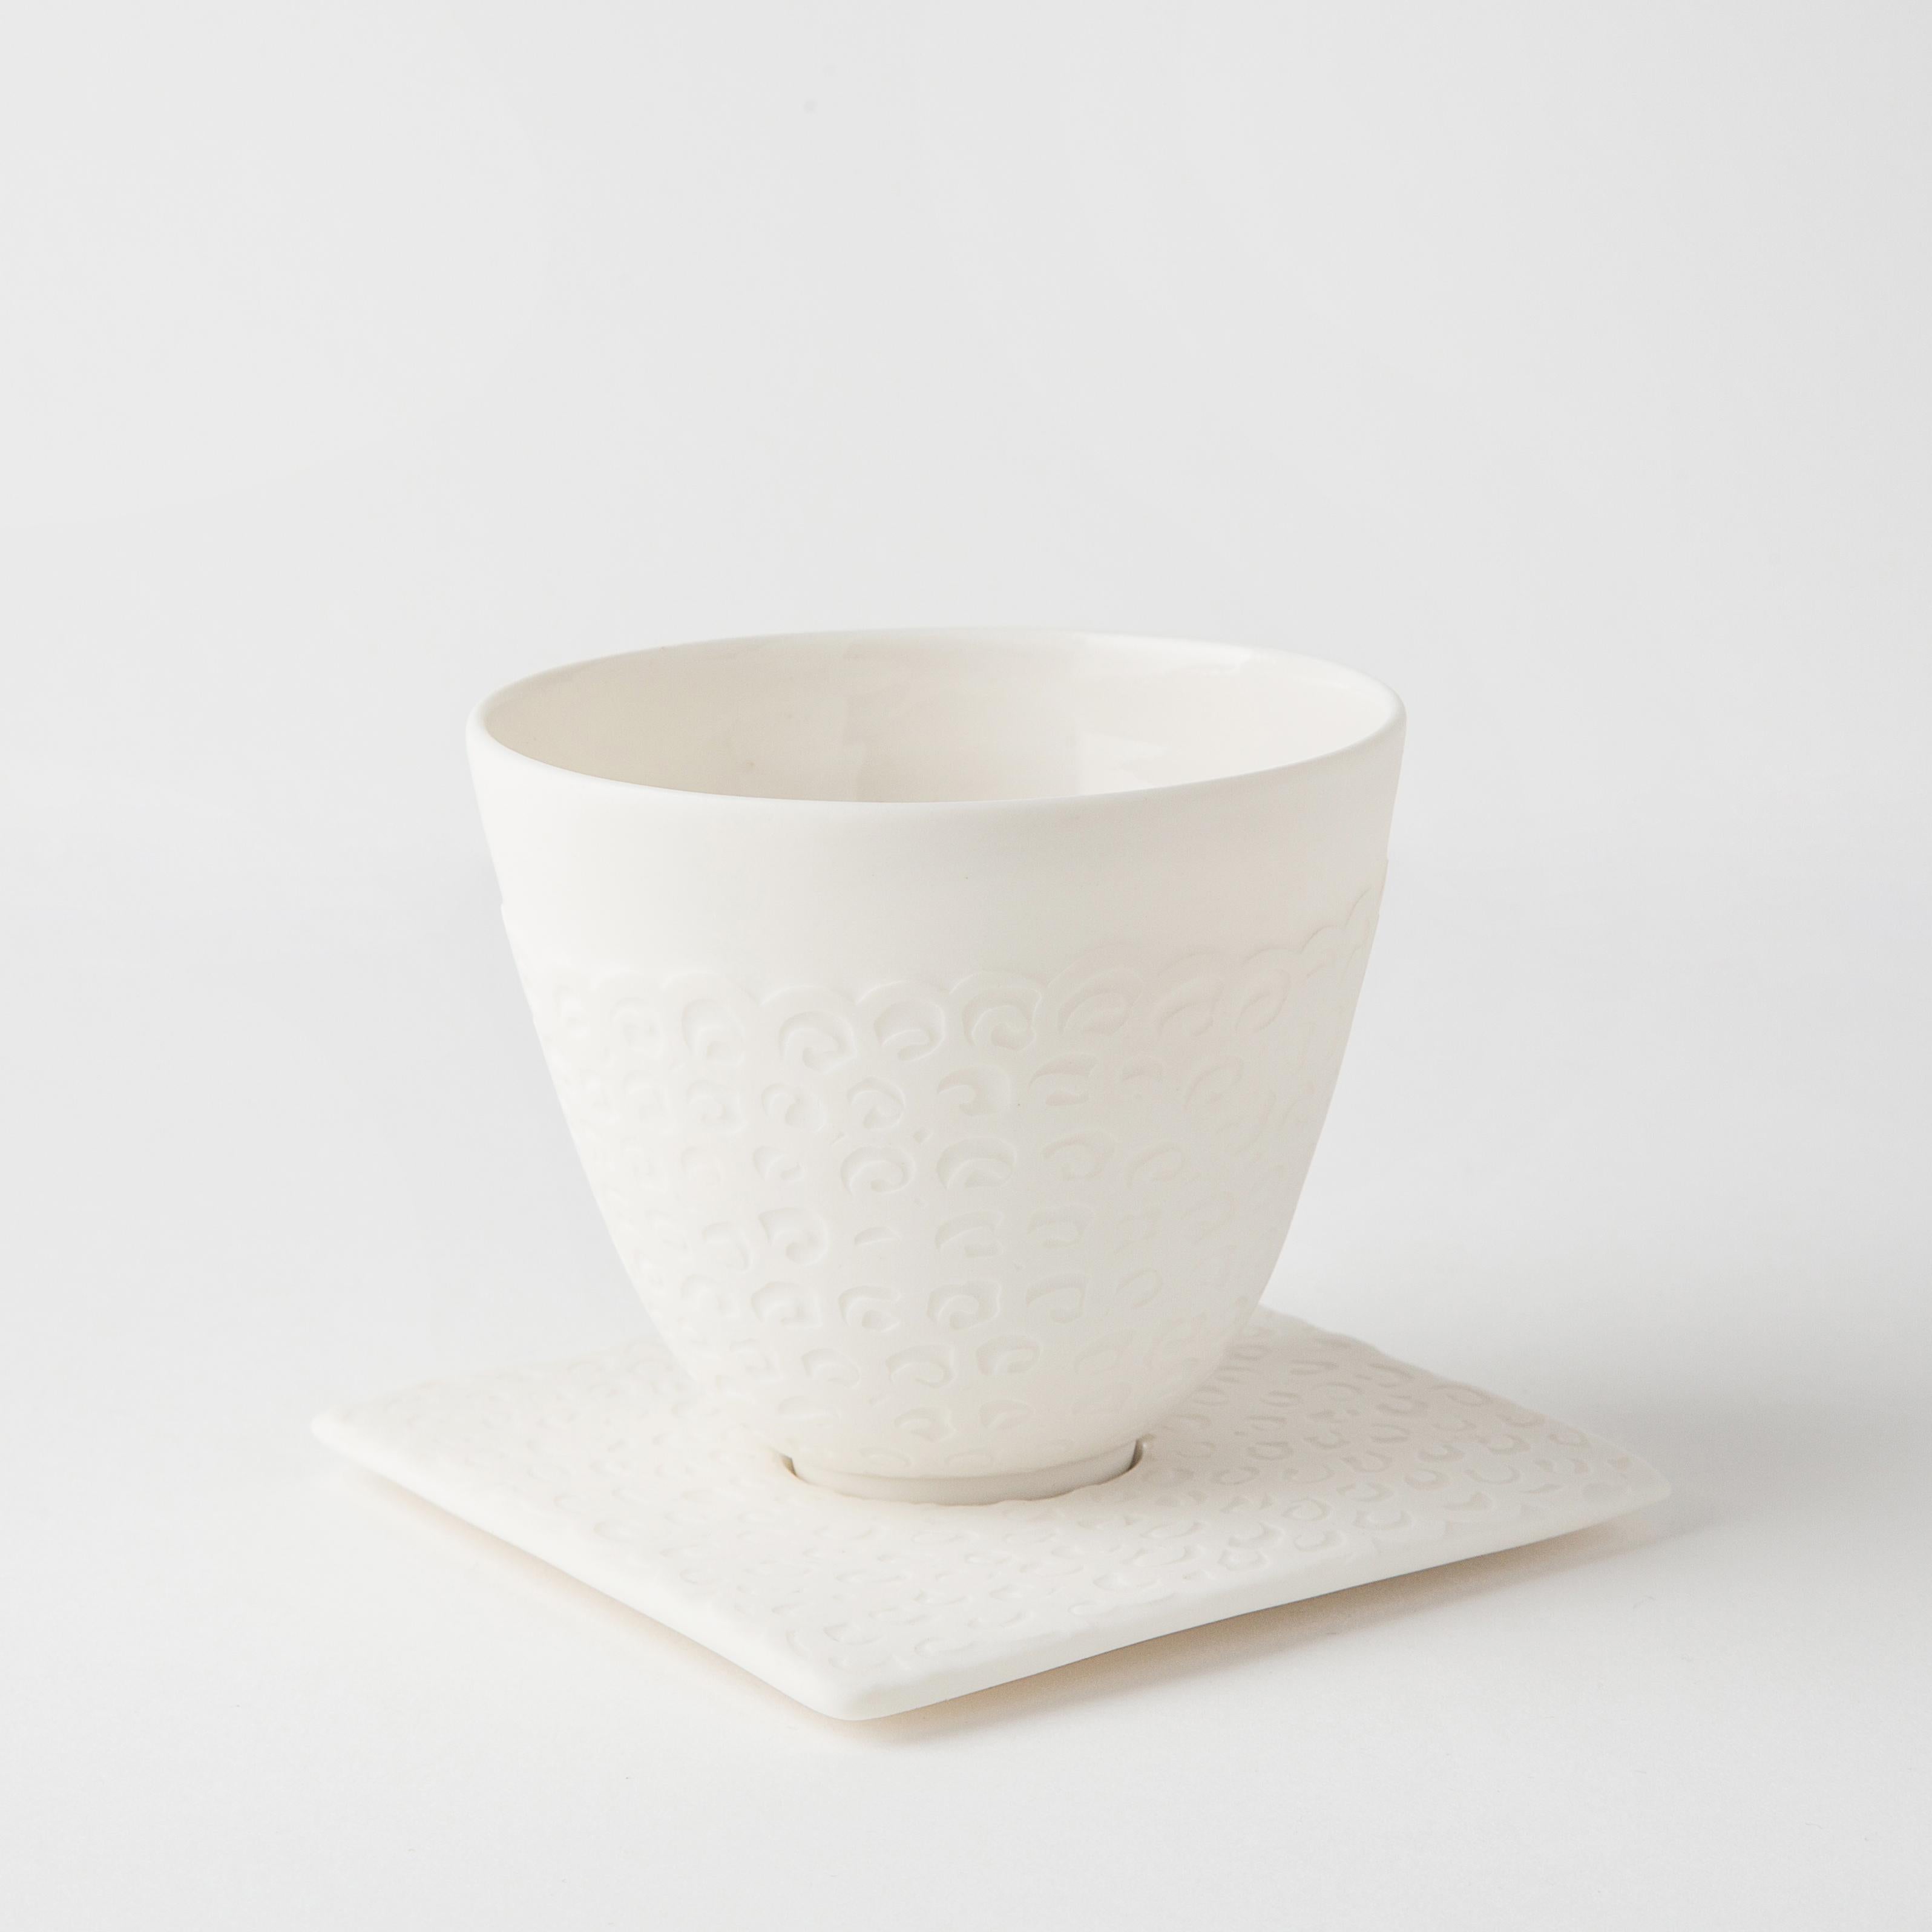 A simple, contemporary style along with the matte, white finesse of the porcelain will add a unique French touch to your table and to your home decor.

Design by Kaoline.